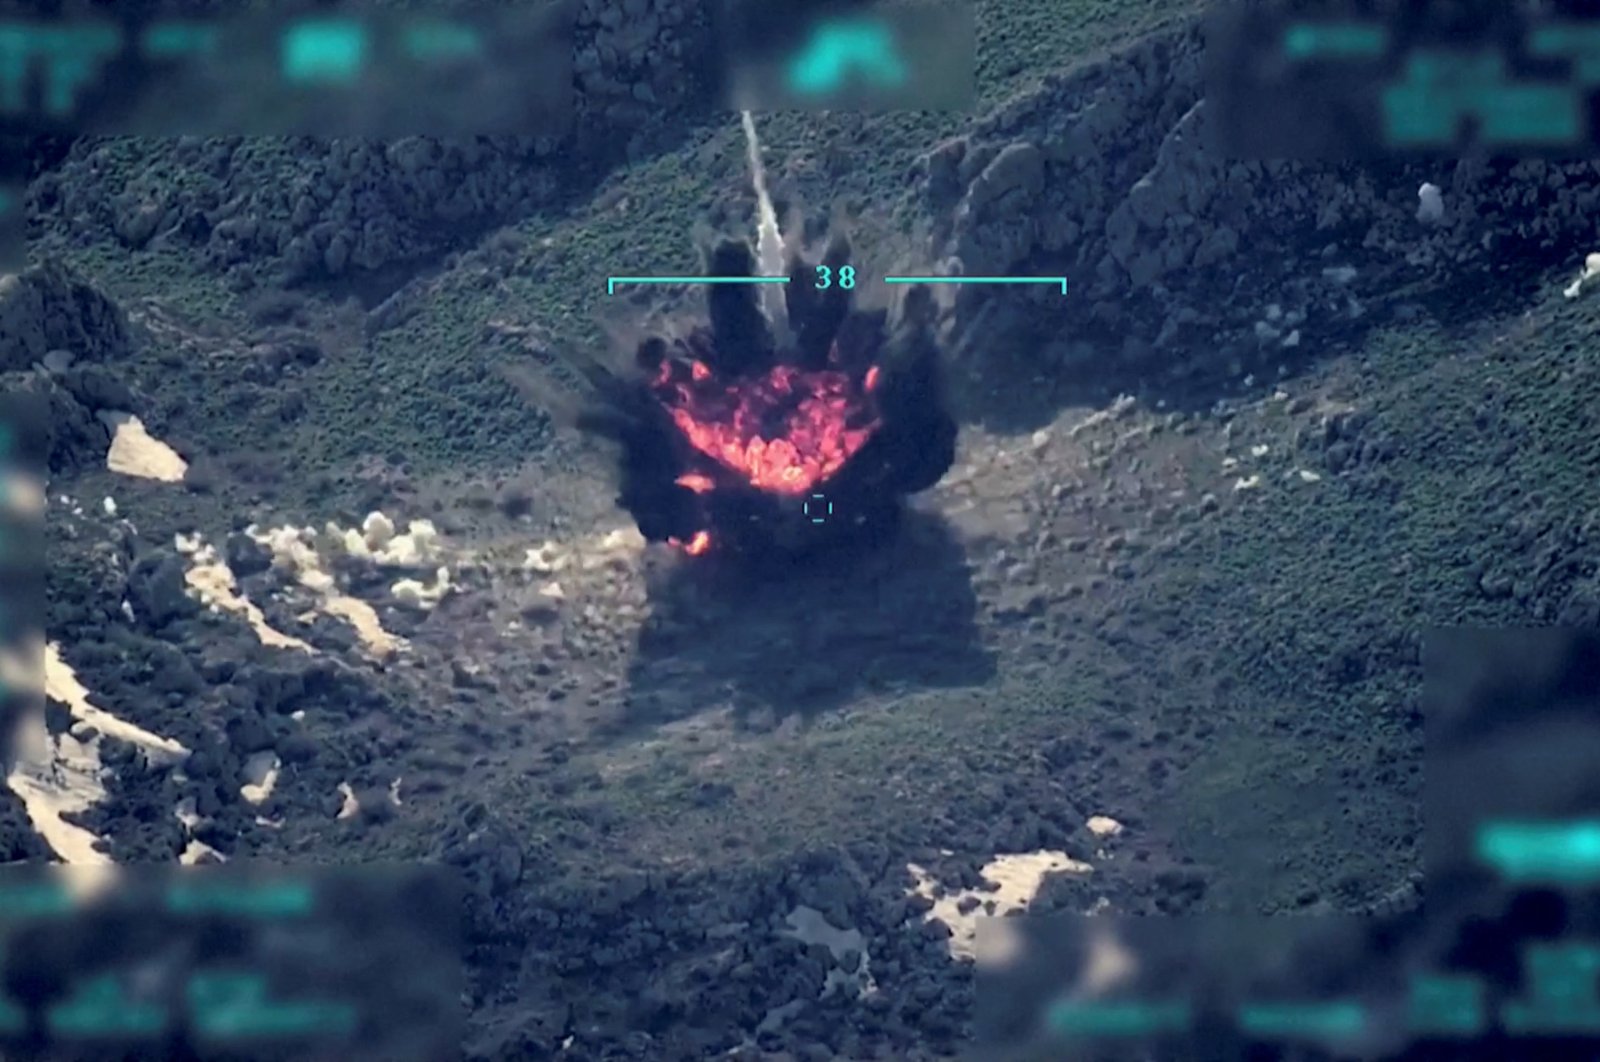 A view of a target being hit during a military operation is seen in this still image taken from a handout video recorded at an unknown location and released on April 18, 2022. (Reuters Photo)